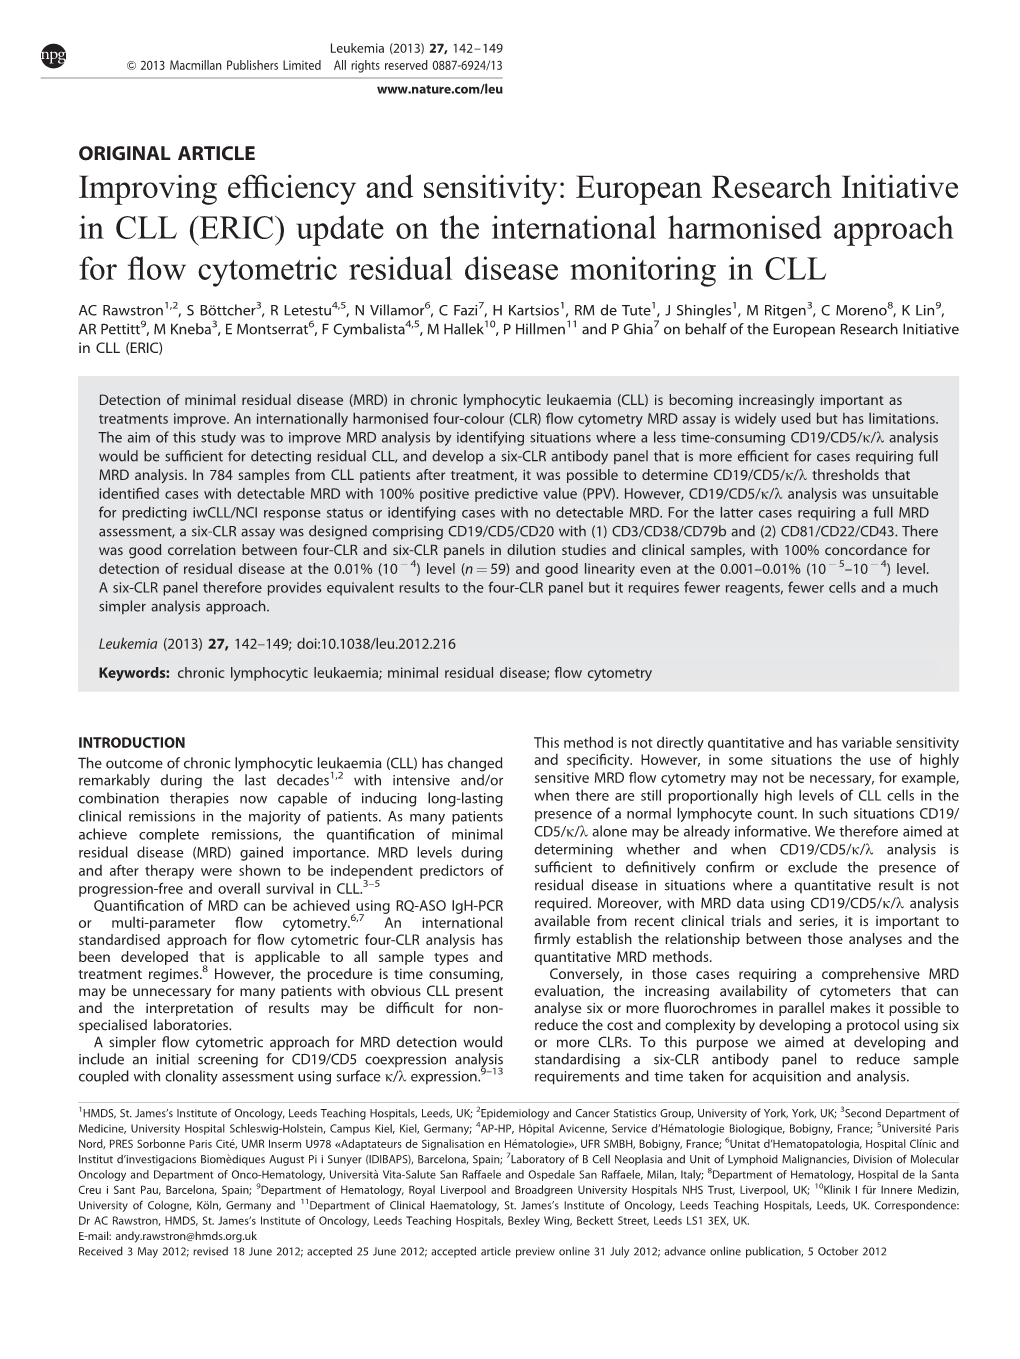 (ERIC) Update on the International Harmonised Approach for Flow Cytometric Residual Disease Monitoring In